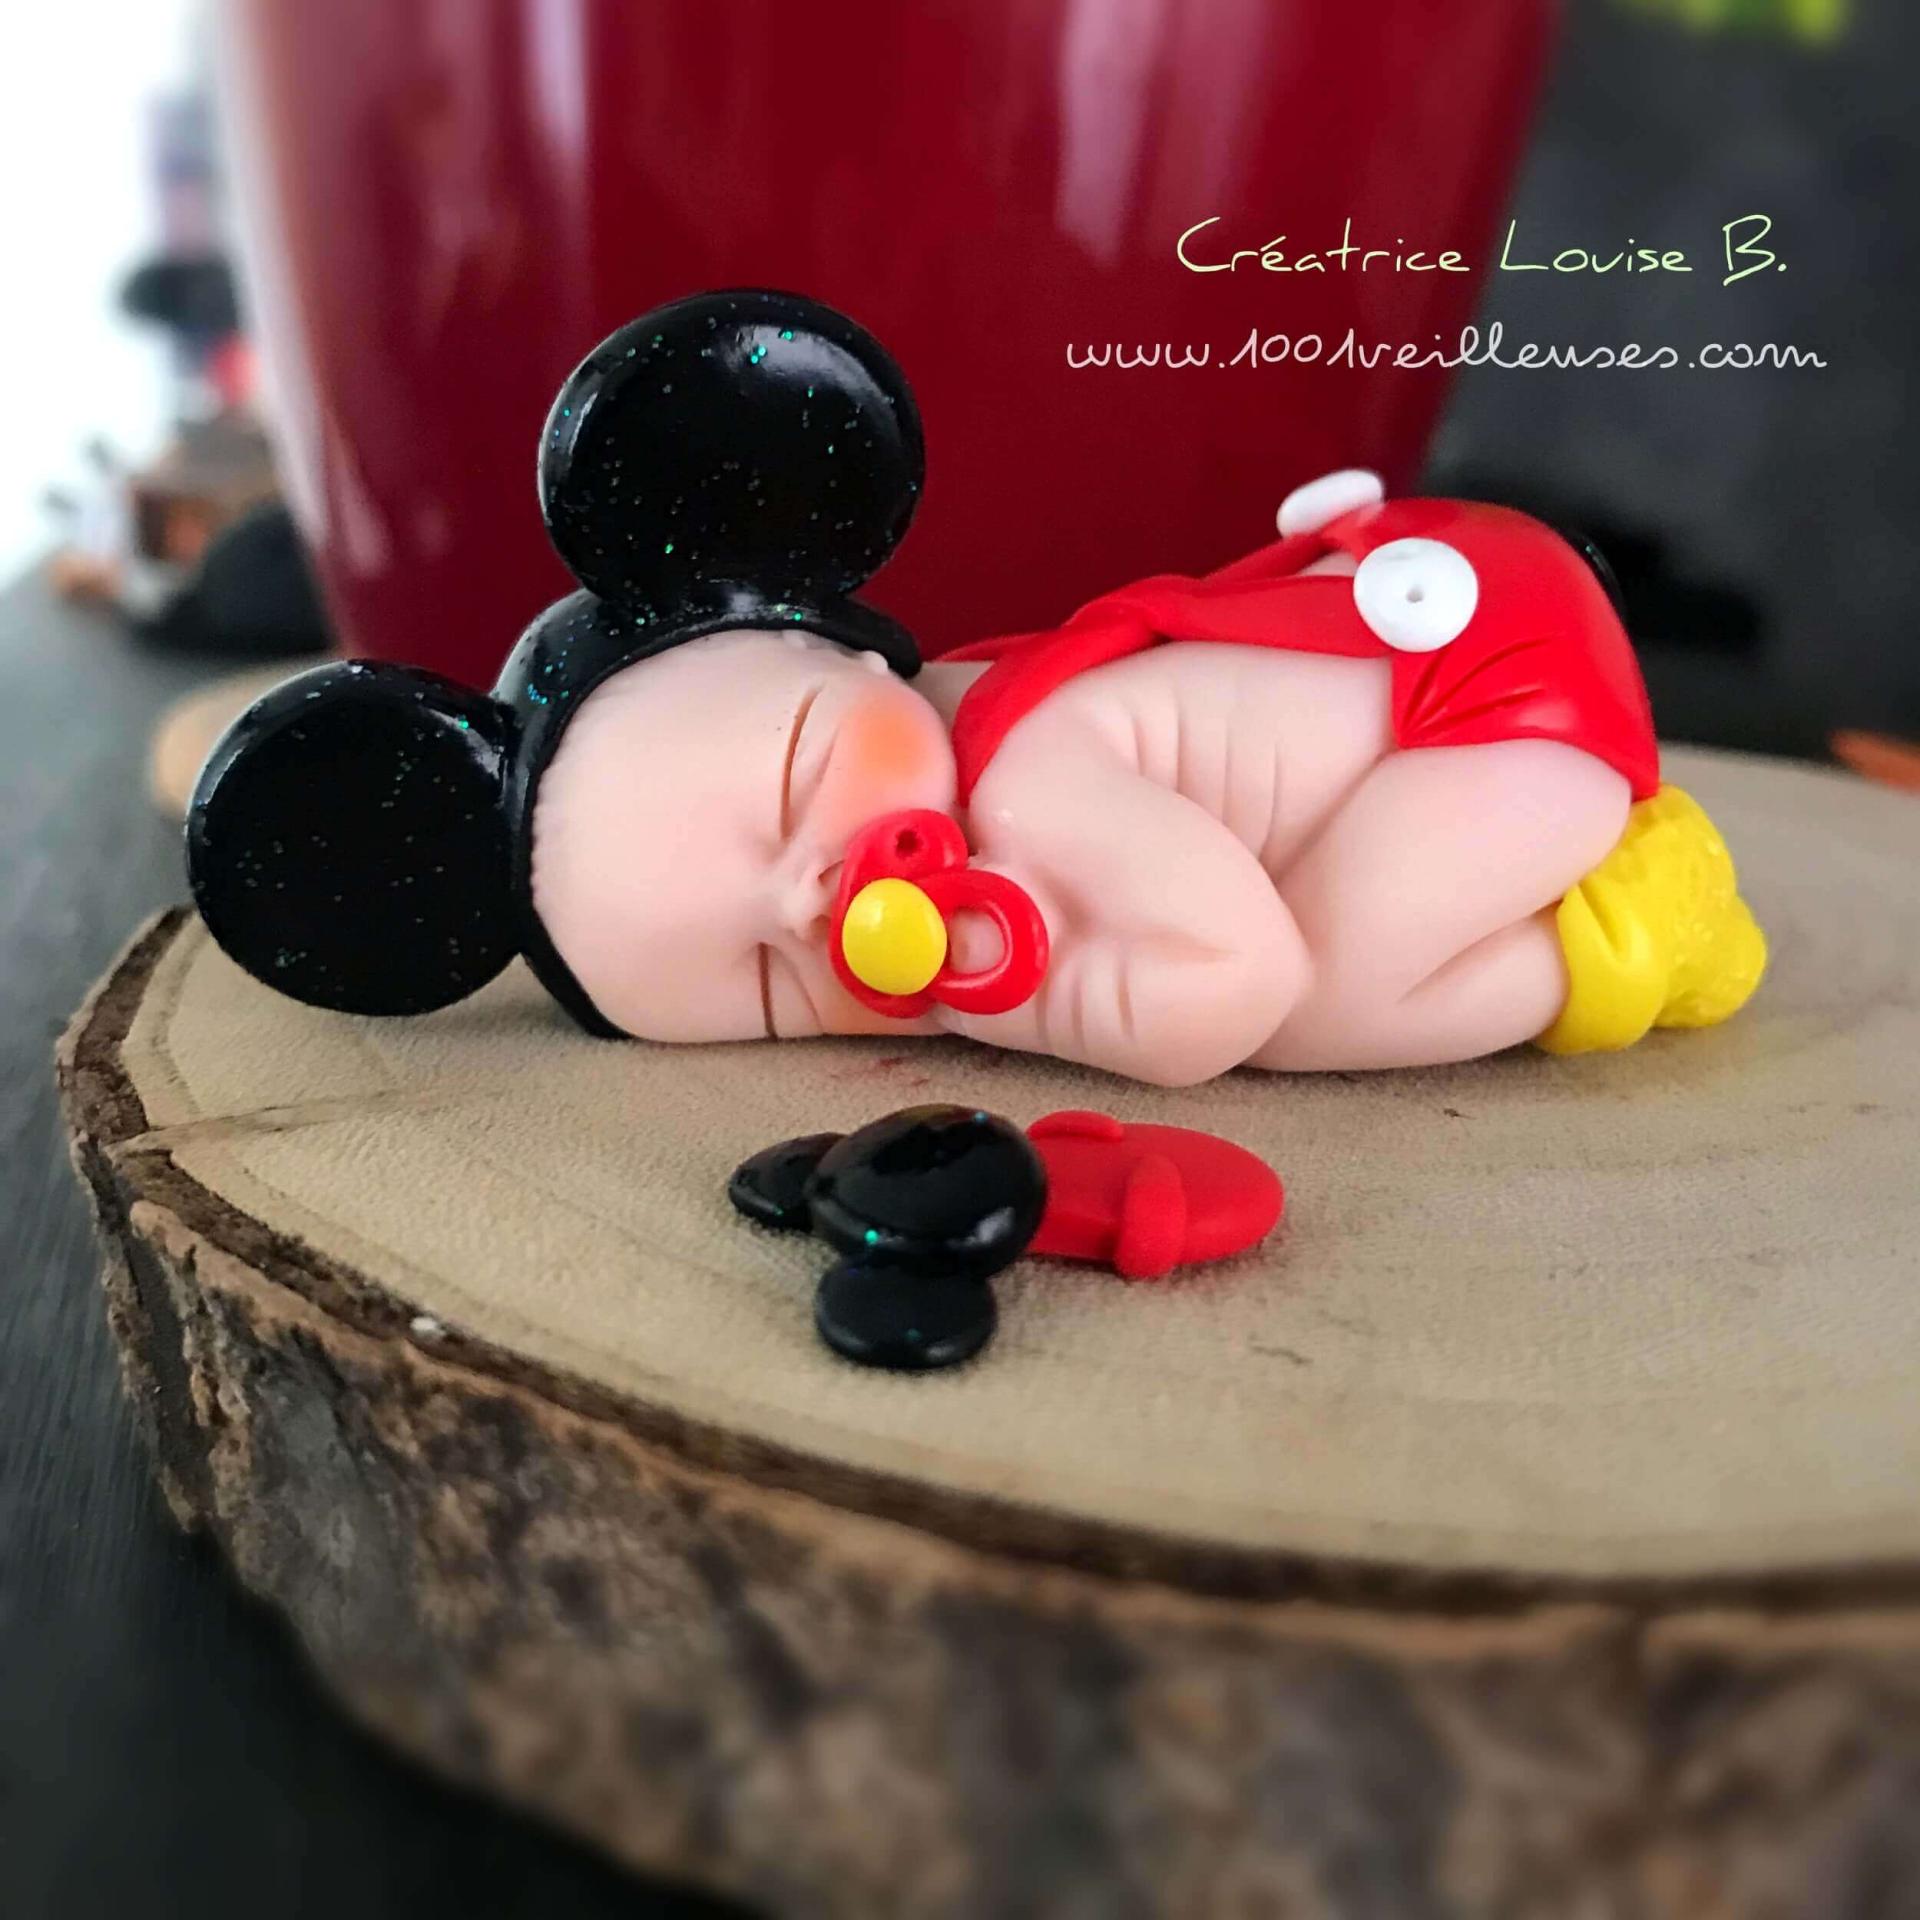 Handcrafted baby Mickey figurine